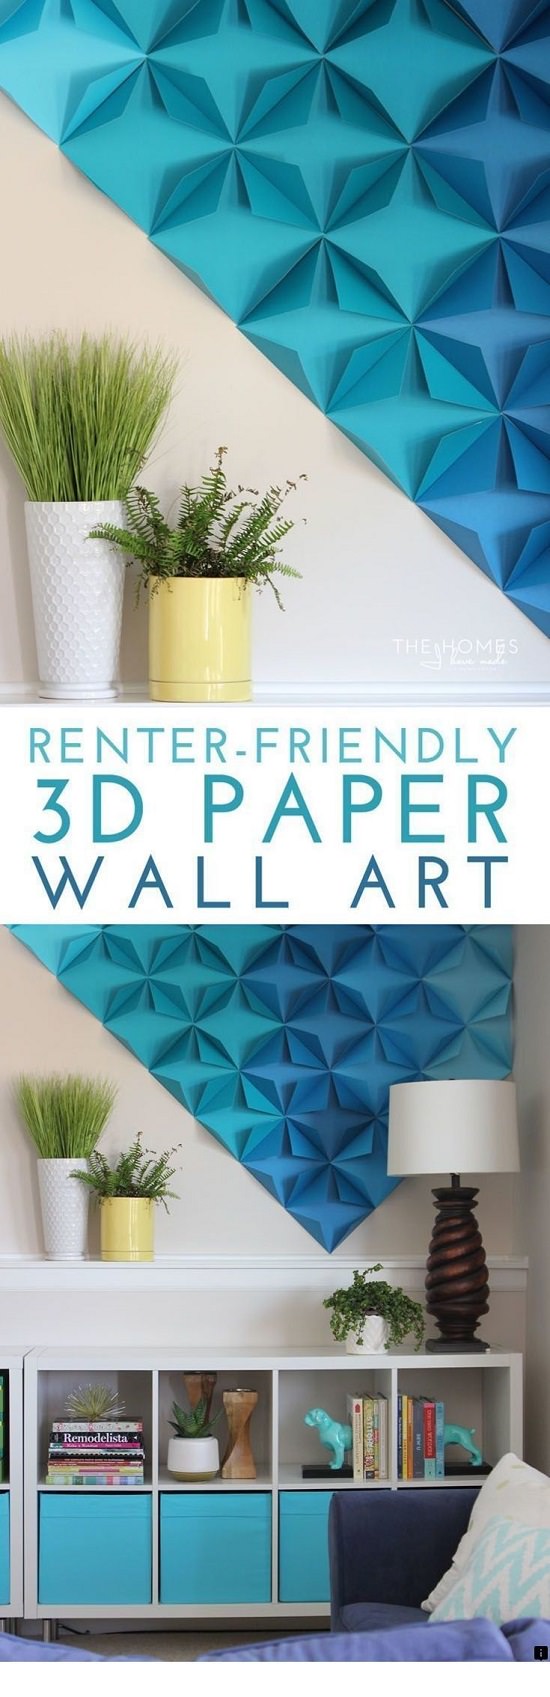 DIY Room Decor With Paper 21